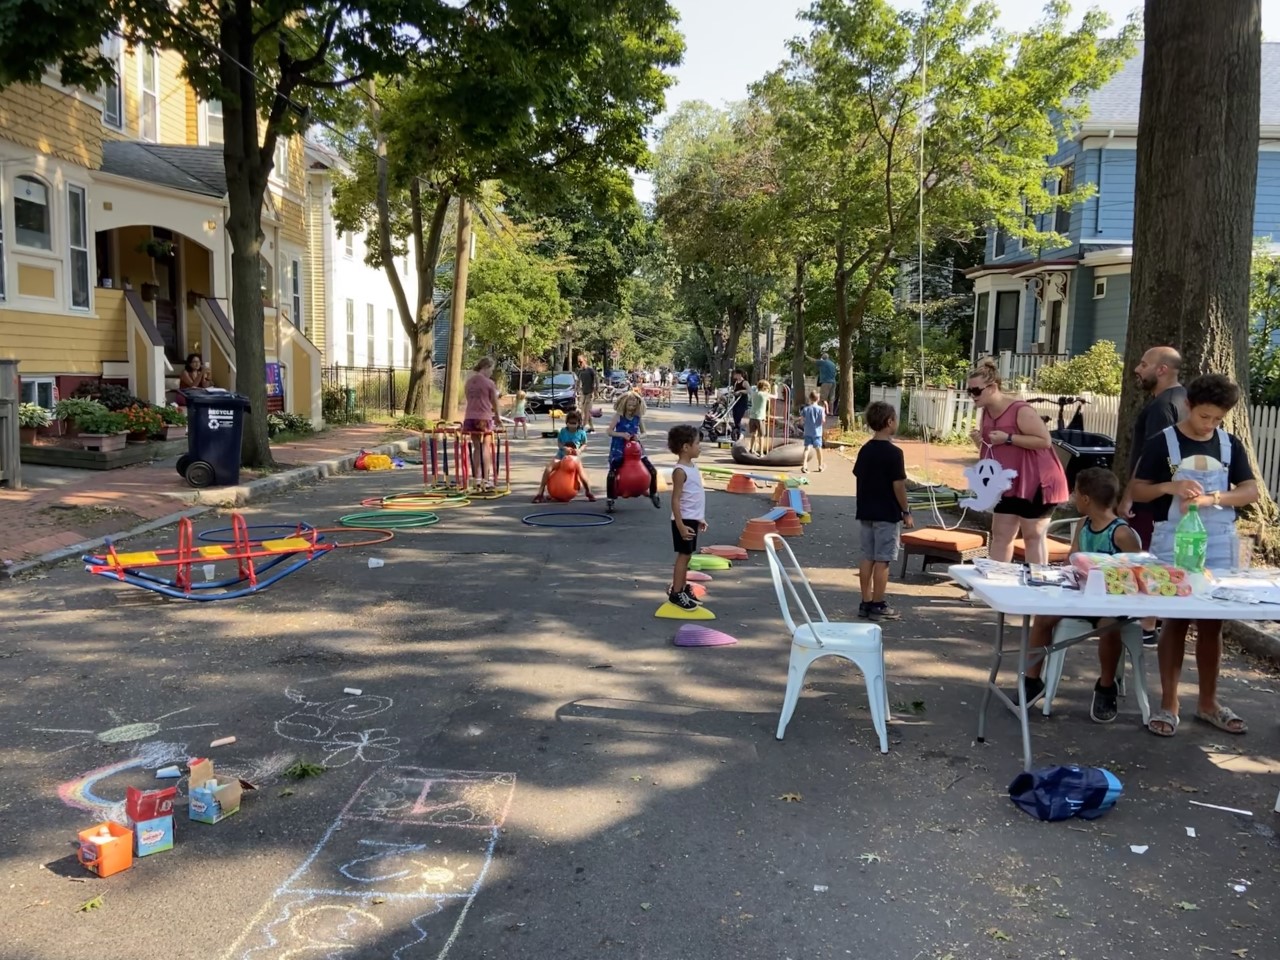 Block Party on a Cambridge street shows a scene of children of various ages playing with Play Street items